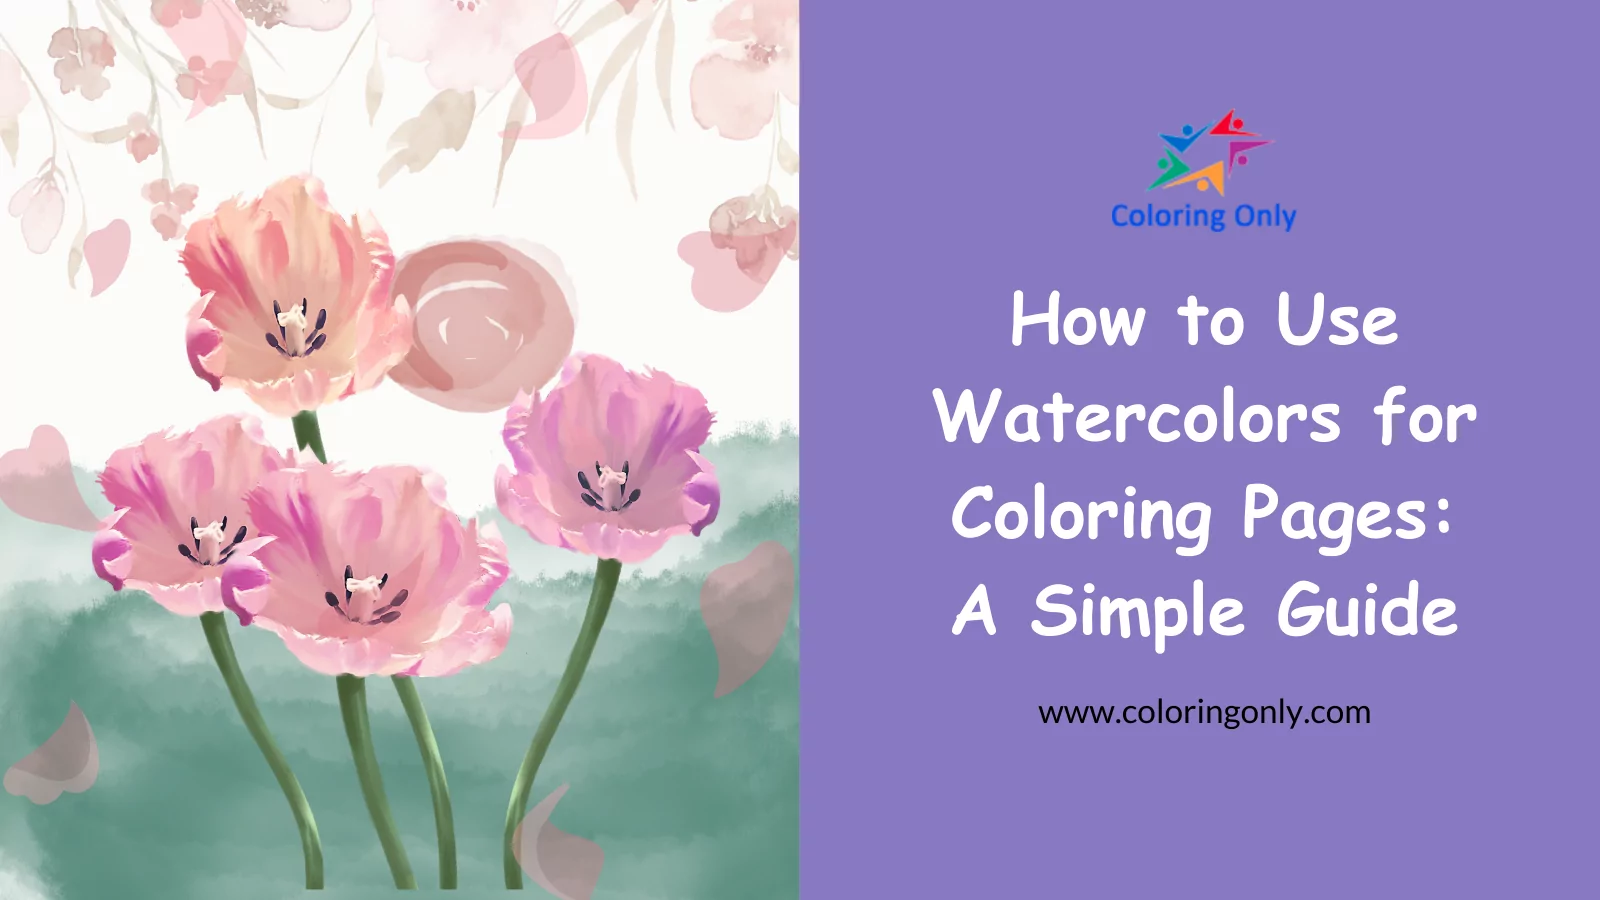 How to Use Watercolors for Coloring Pages: A Simple Guide